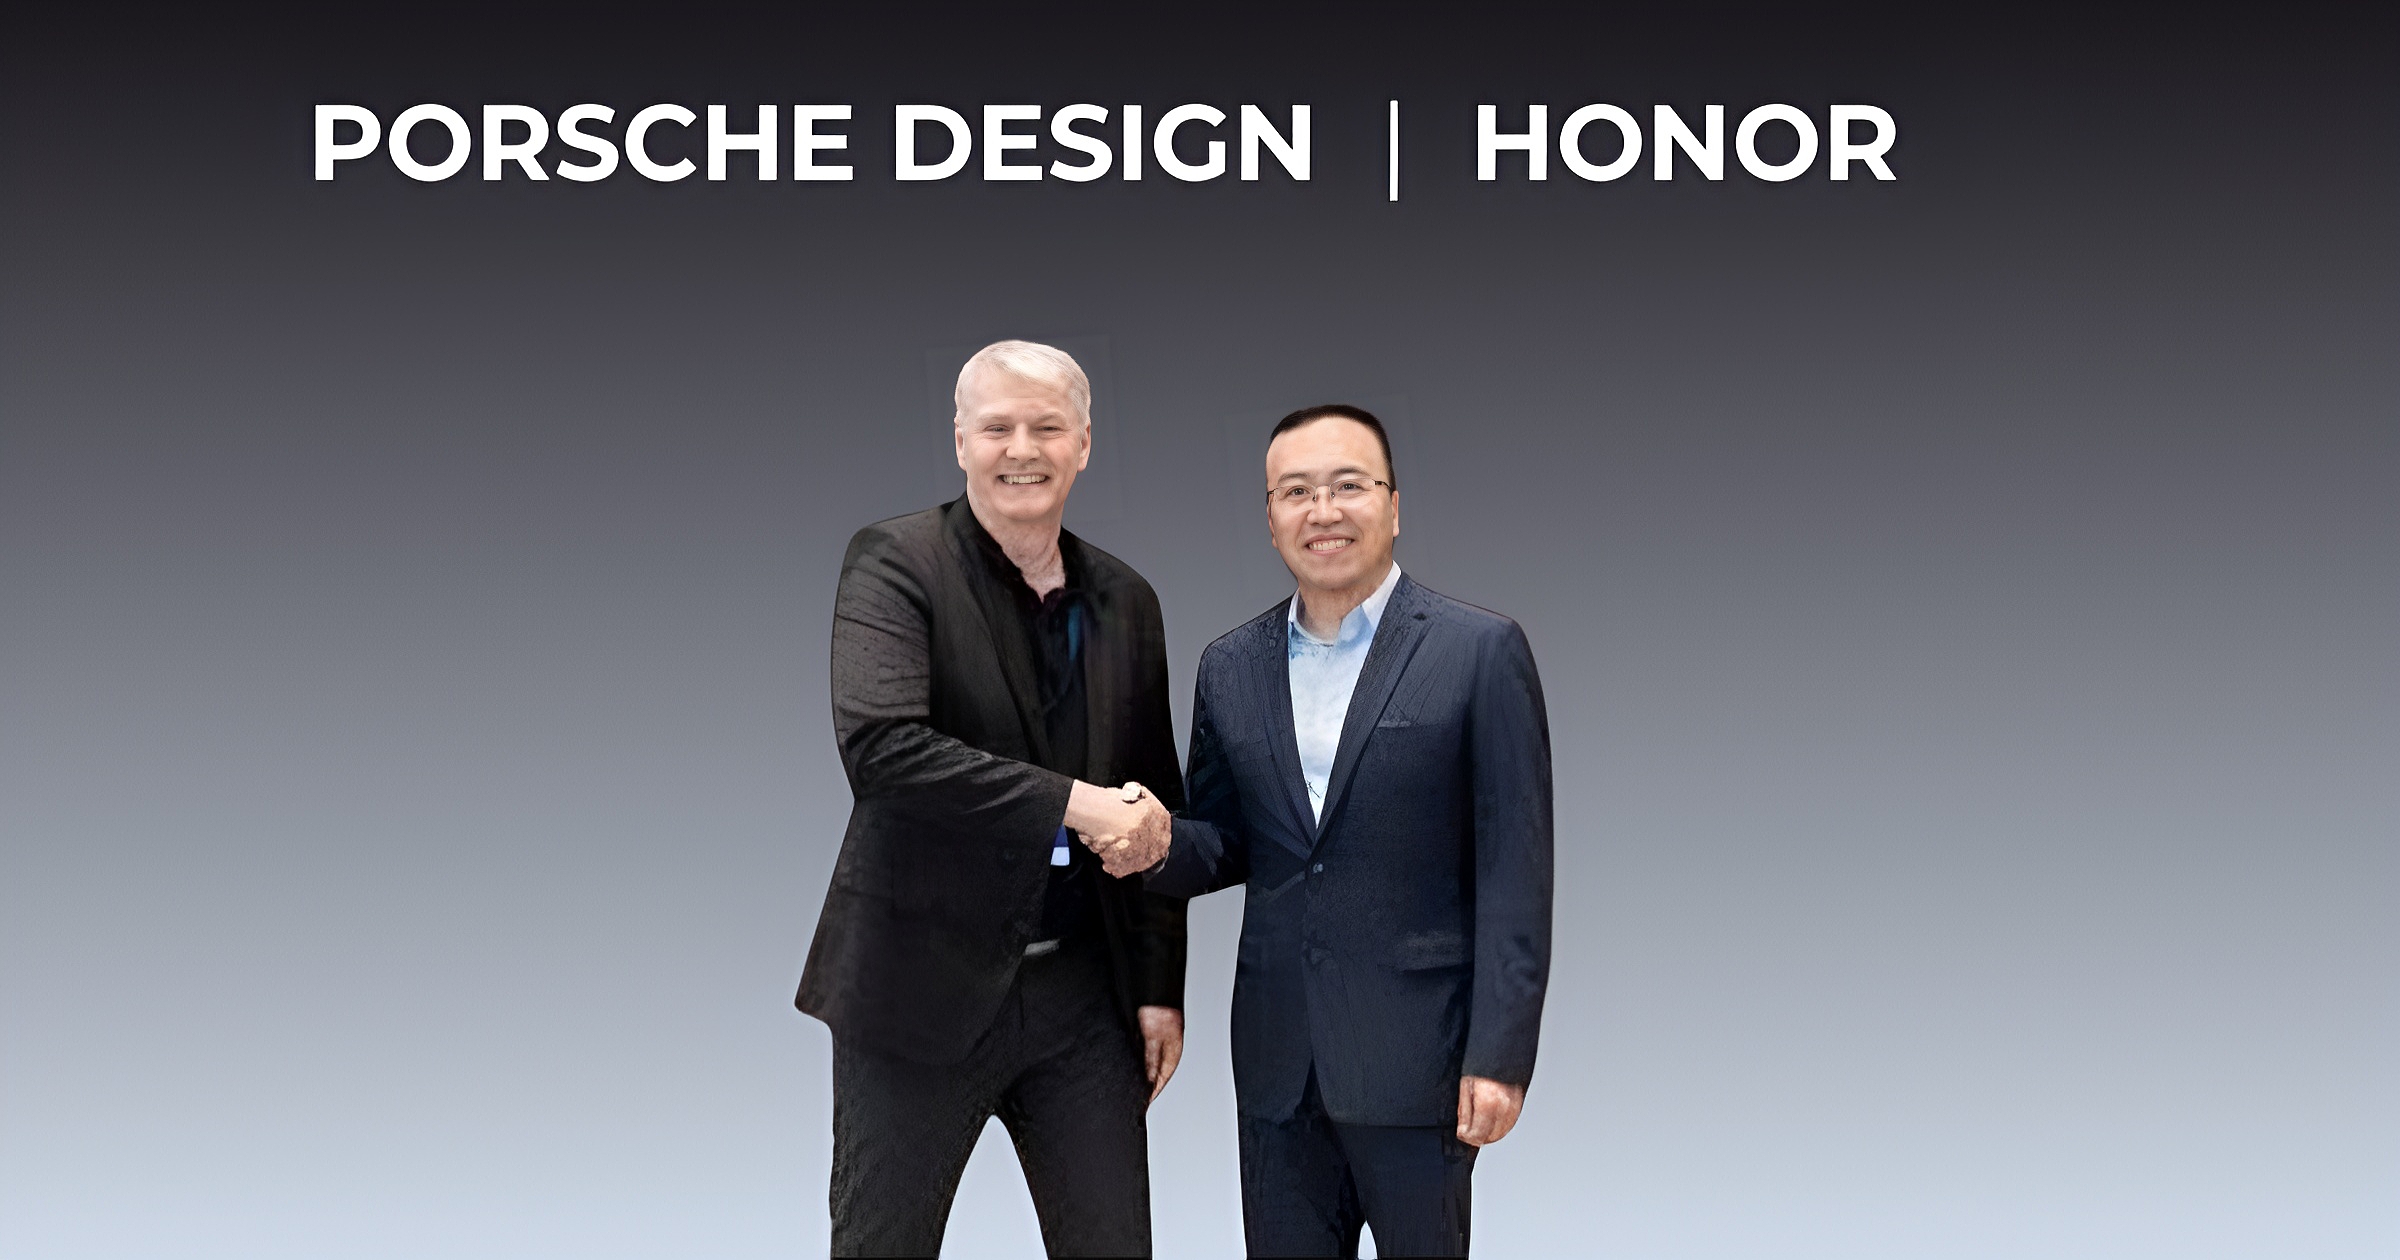 HONOR and Porsche Design Join Forces to Combine Cutting-Edge Technologies  with Functional Design - HONOR Global